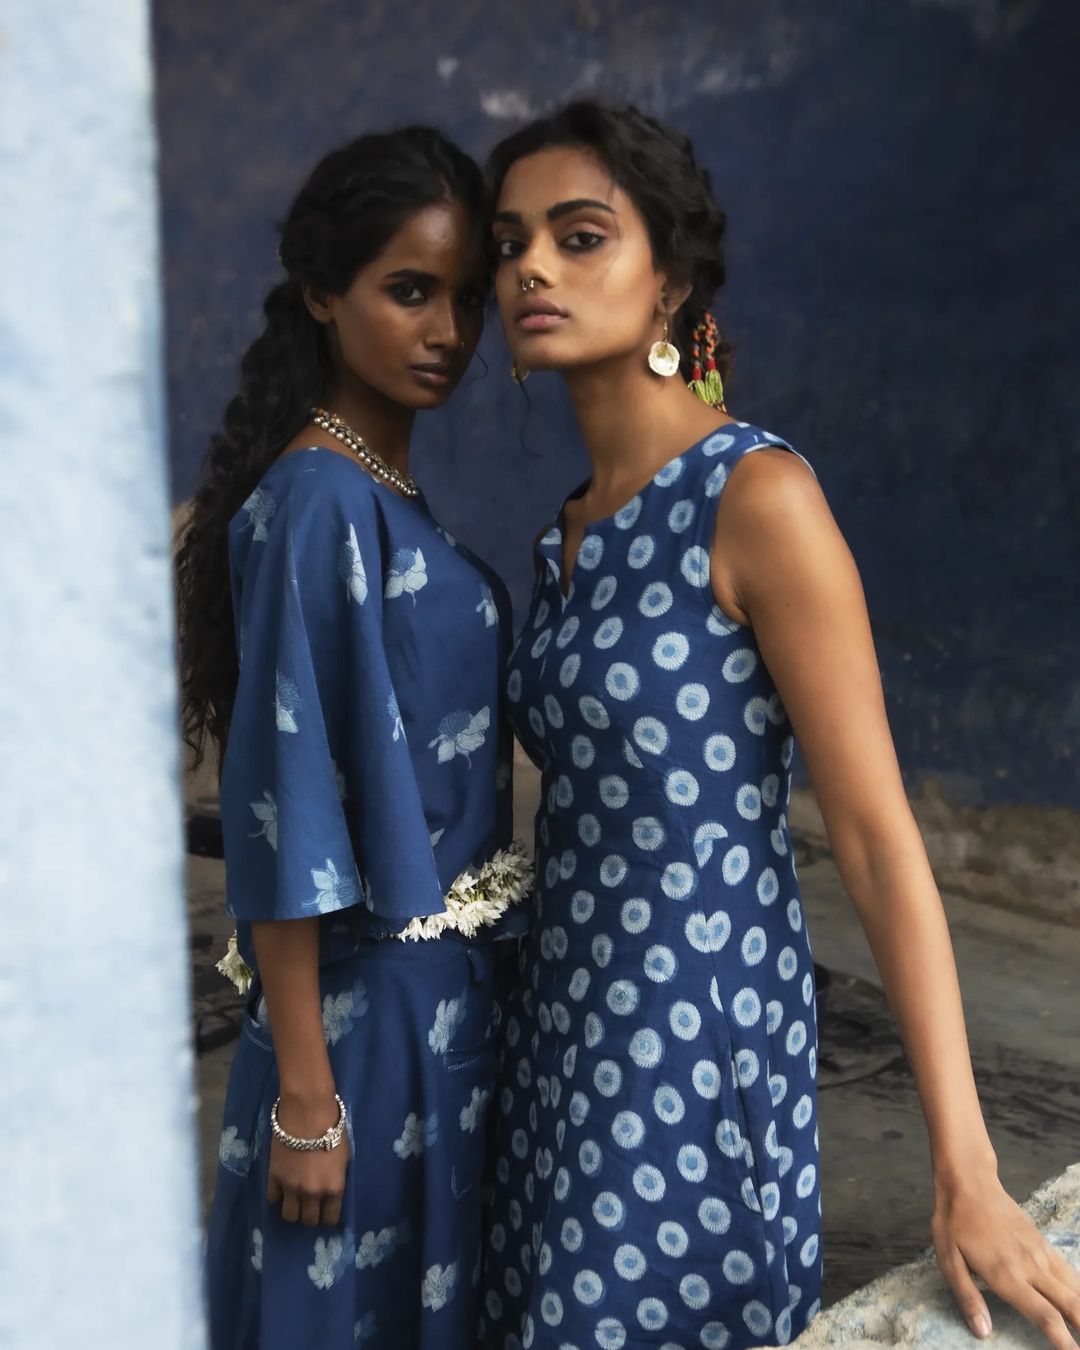 FabIndia has launched a new initiative to promote the art of indigo dyeing